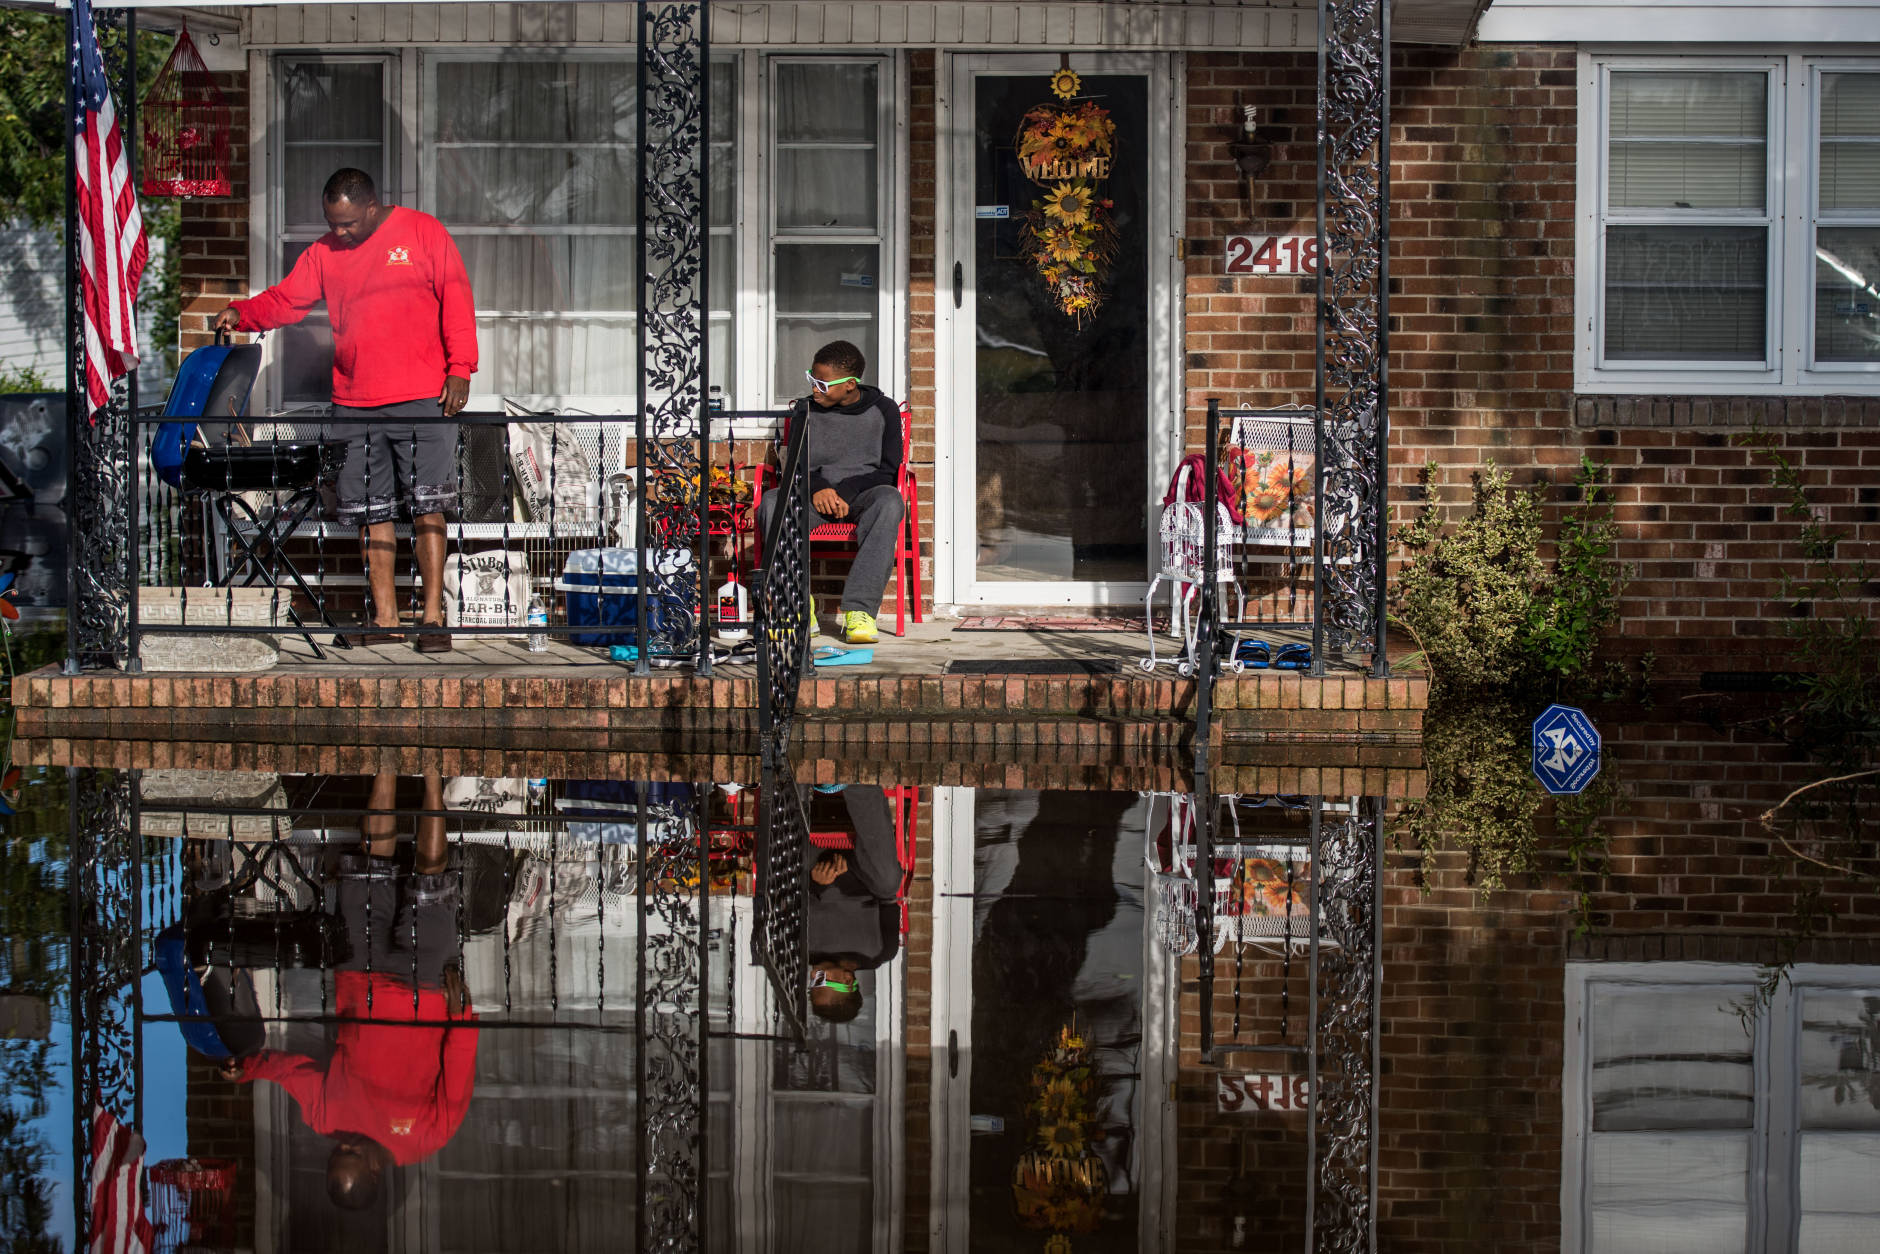 LUMBERTON, NC - OCTOBER 12: Robert Addison, left cooks breakfast on a charcoal grill with his son, Artis Addison, on October 12, 2016 in Lumberton, North Carolina. Hurricane Matthew's heavy rains ended over the weekend, but flooding is still expected for days in North Carolina. (Photo by Sean Rayford/Getty Images)